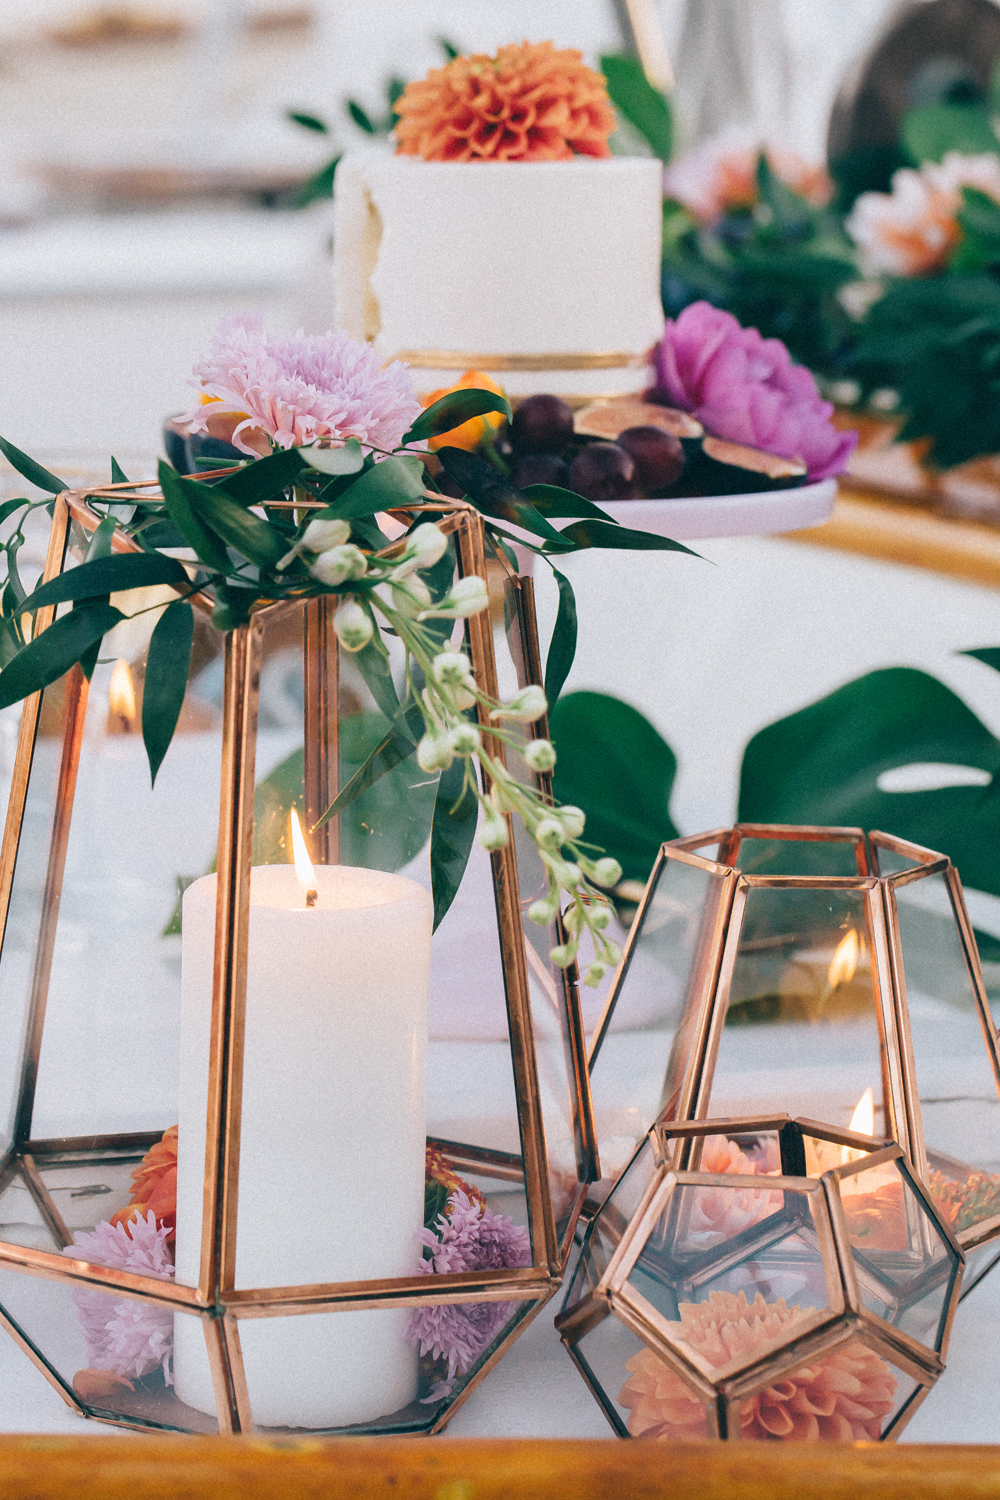 Geometric copper candle holder for a modern wedding centerpiece. // 15 Stunning Ways to Decorate with Candles // http://mysweetengagement.com